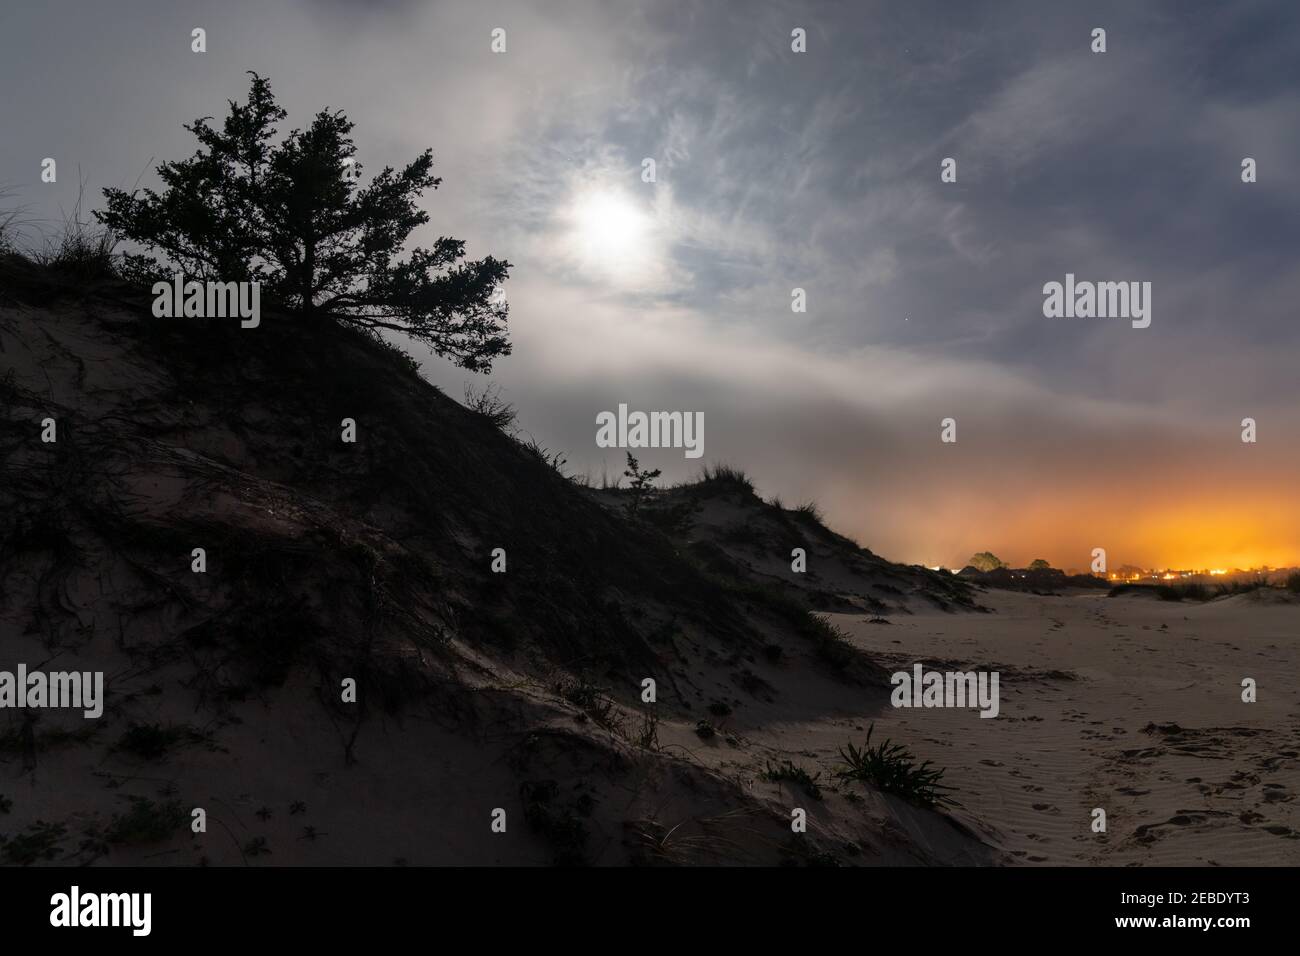 A sand dune and tree silhouette under an overcast evening sky with full moon and village lights behind Stock Photo